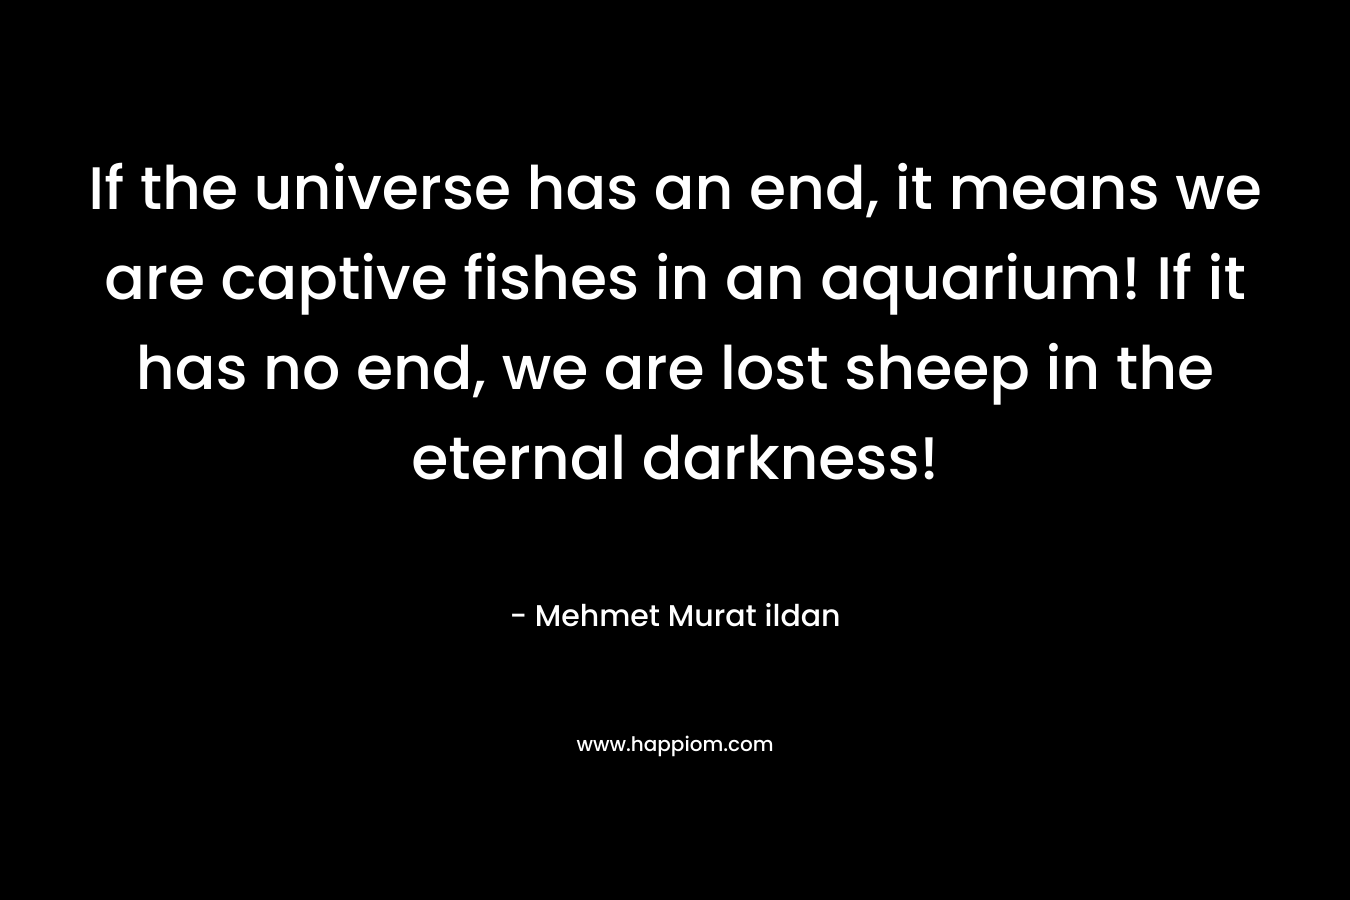 If the universe has an end, it means we are captive fishes in an aquarium! If it has no end, we are lost sheep in the eternal darkness!